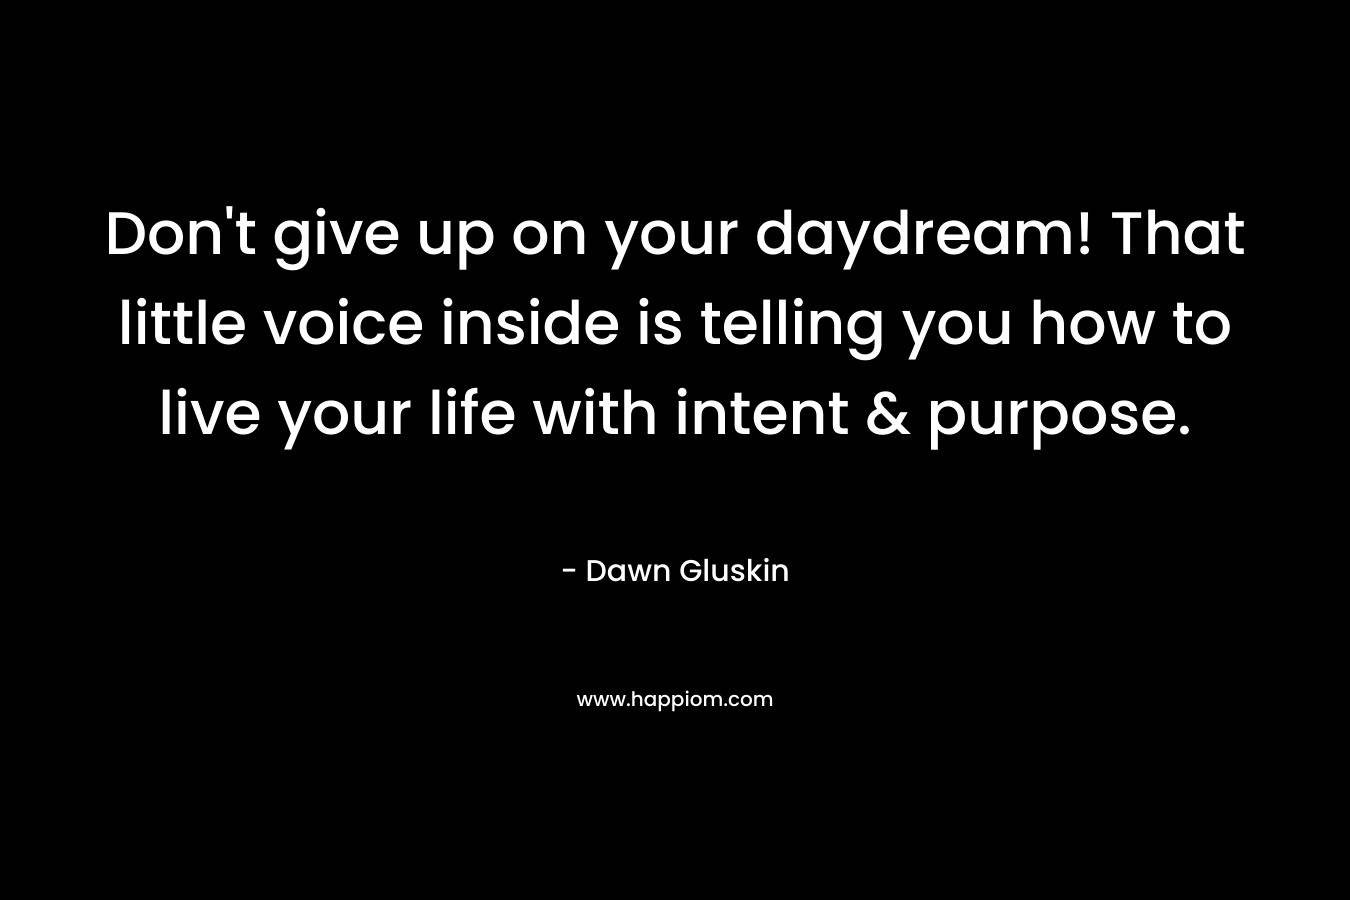 Don't give up on your daydream! That little voice inside is telling you how to live your life with intent & purpose.